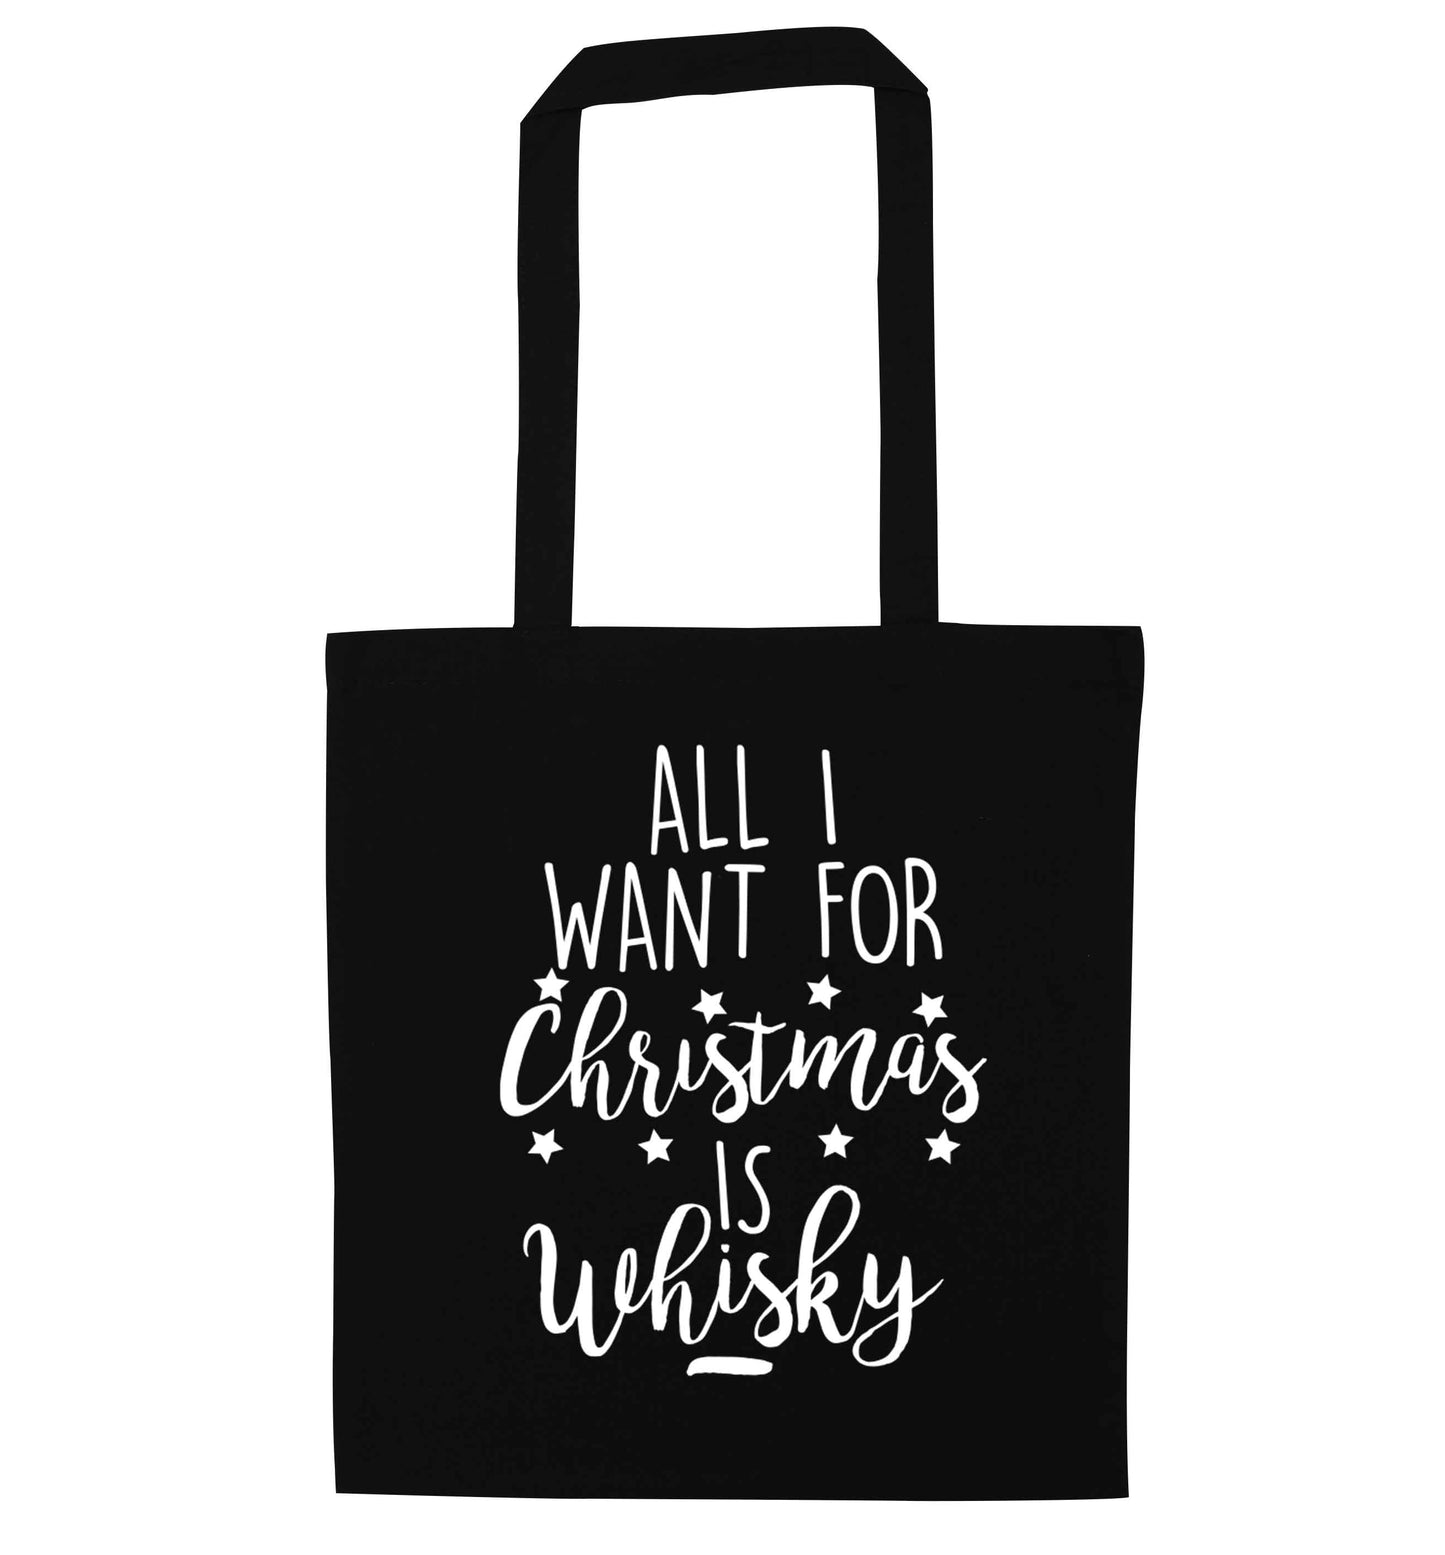 All I want for Christmas is whisky black tote bag